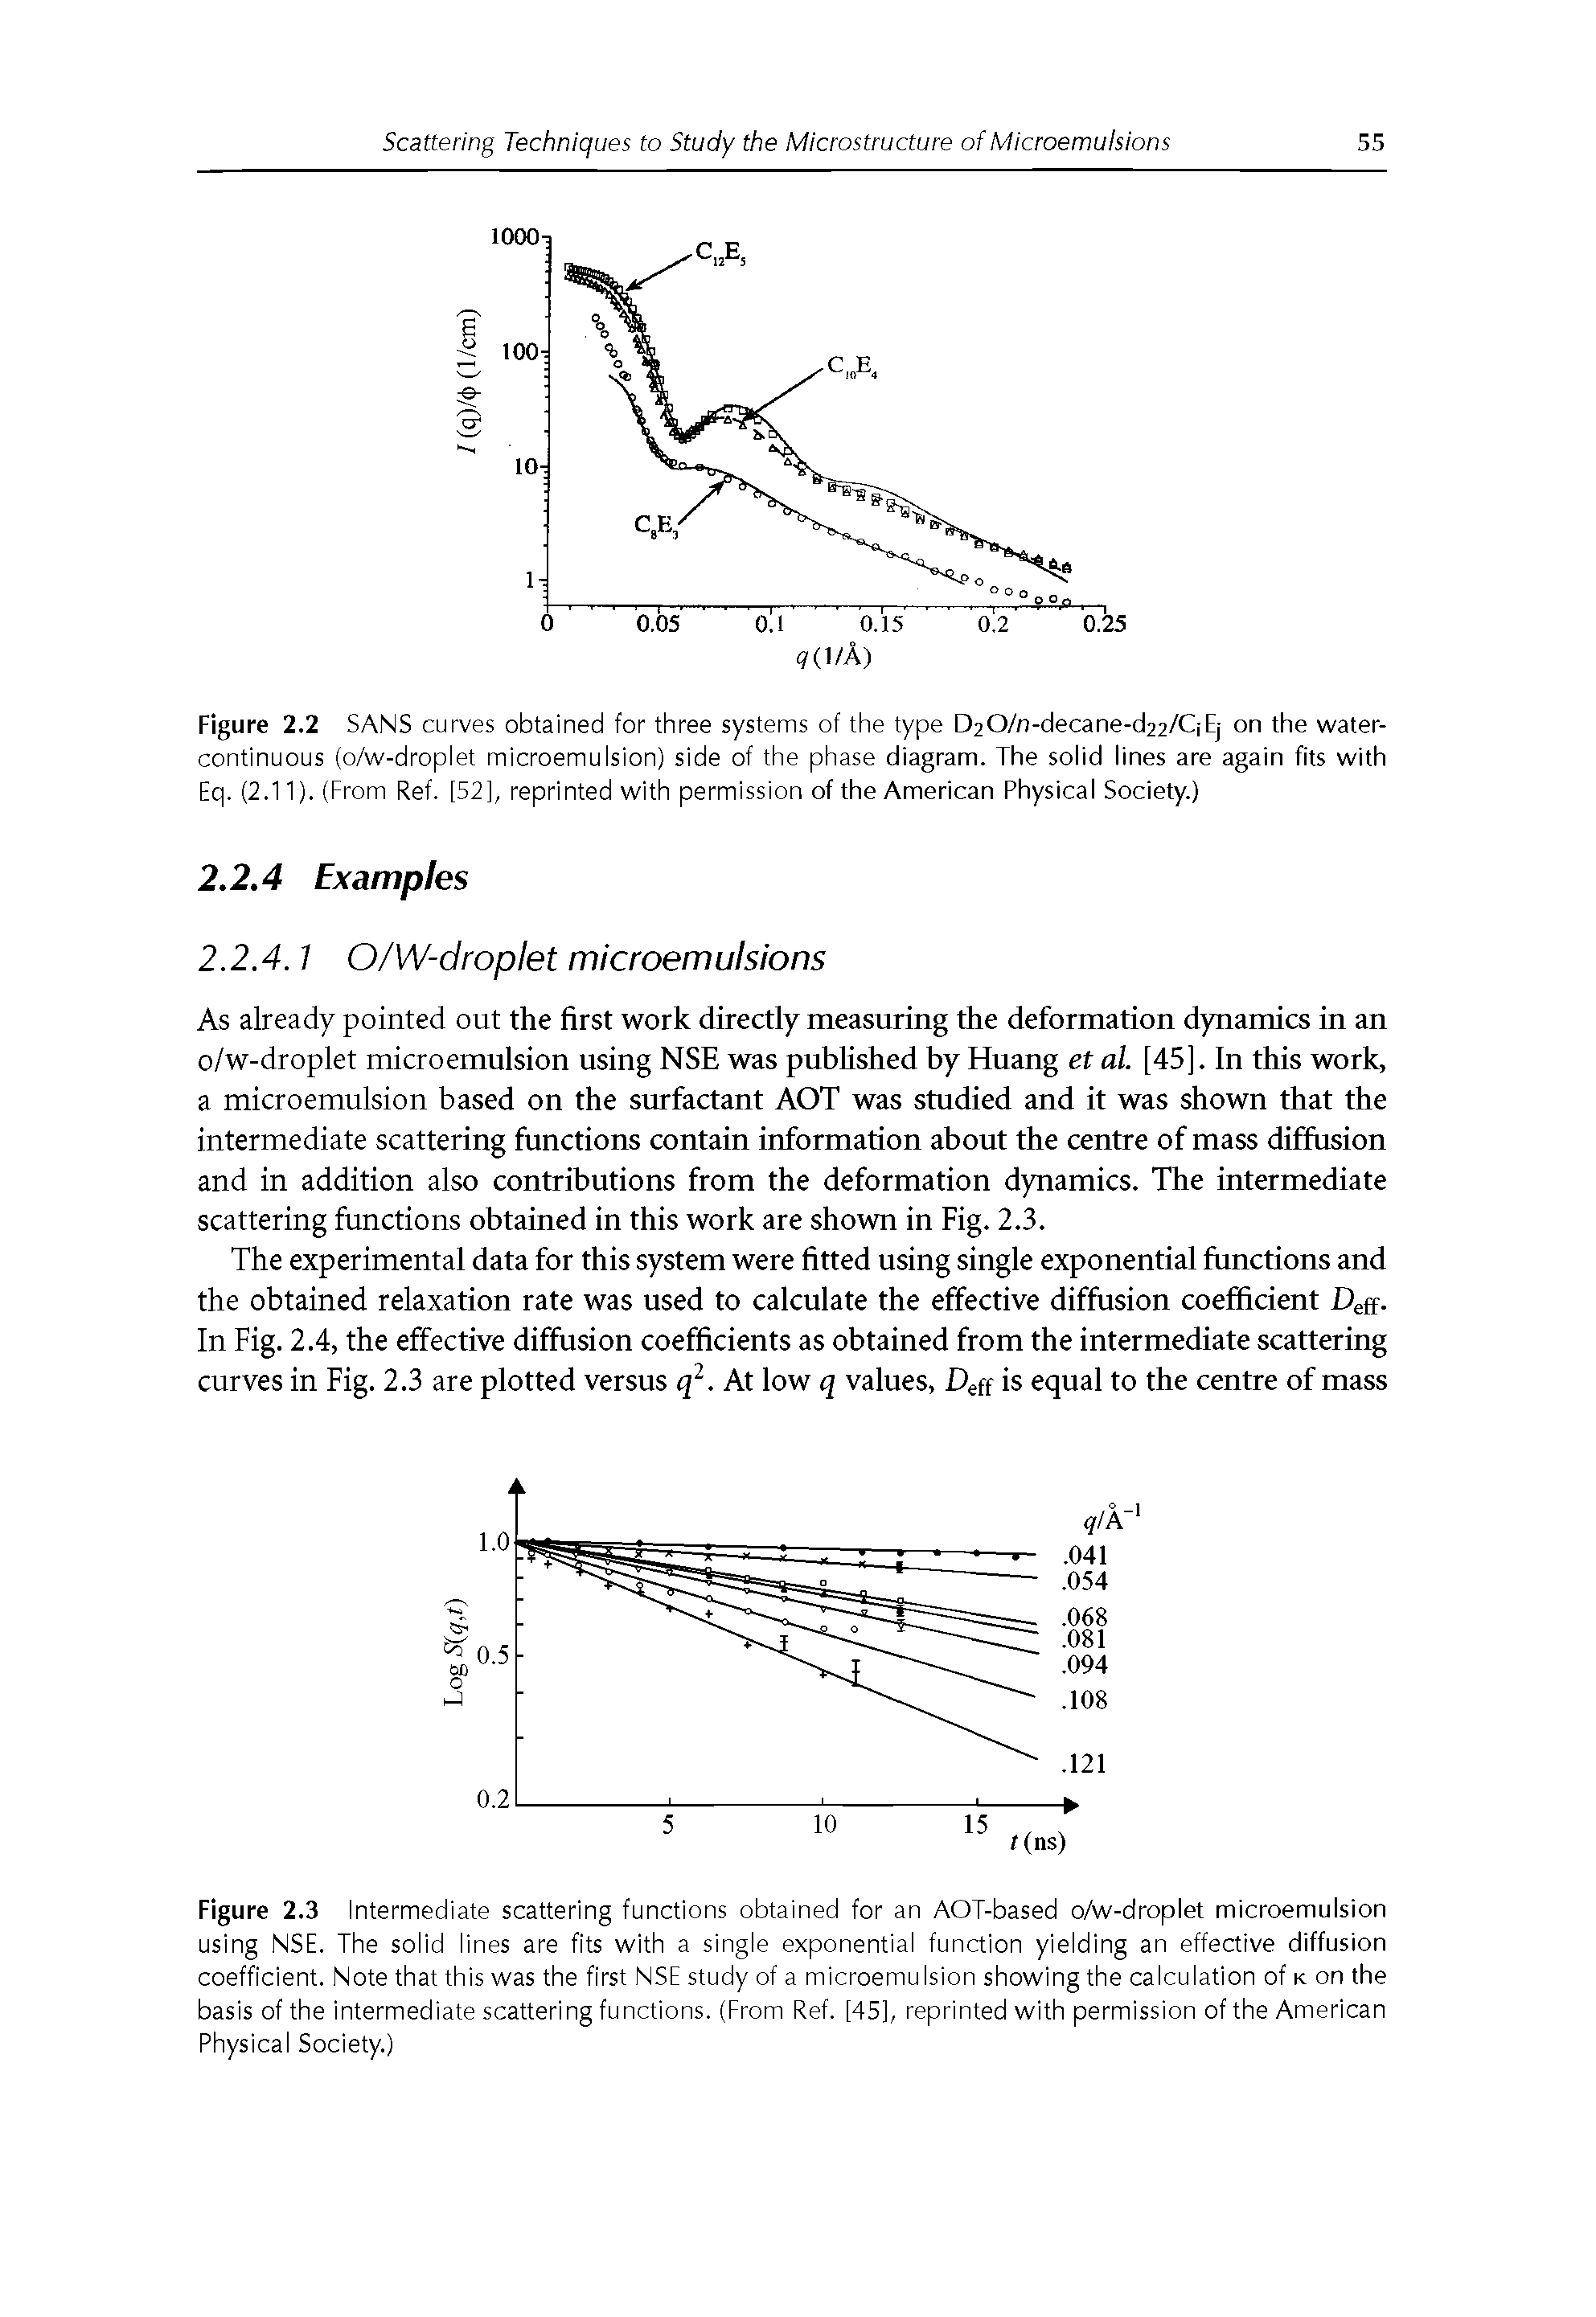 Figure 2.3 Intermediate scattering functions obtained for an AOT-based o/w-droplet microemulsion using NSE. The solid lines are fits with a single exponential function yielding an effective diffusion coefficient. Note that this was the first NSE study of a microemulsion showing the calculation of k on the basis of the intermediate scattering functions. (From Ref. [45], reprinted with permission of the American Physical Society.)...